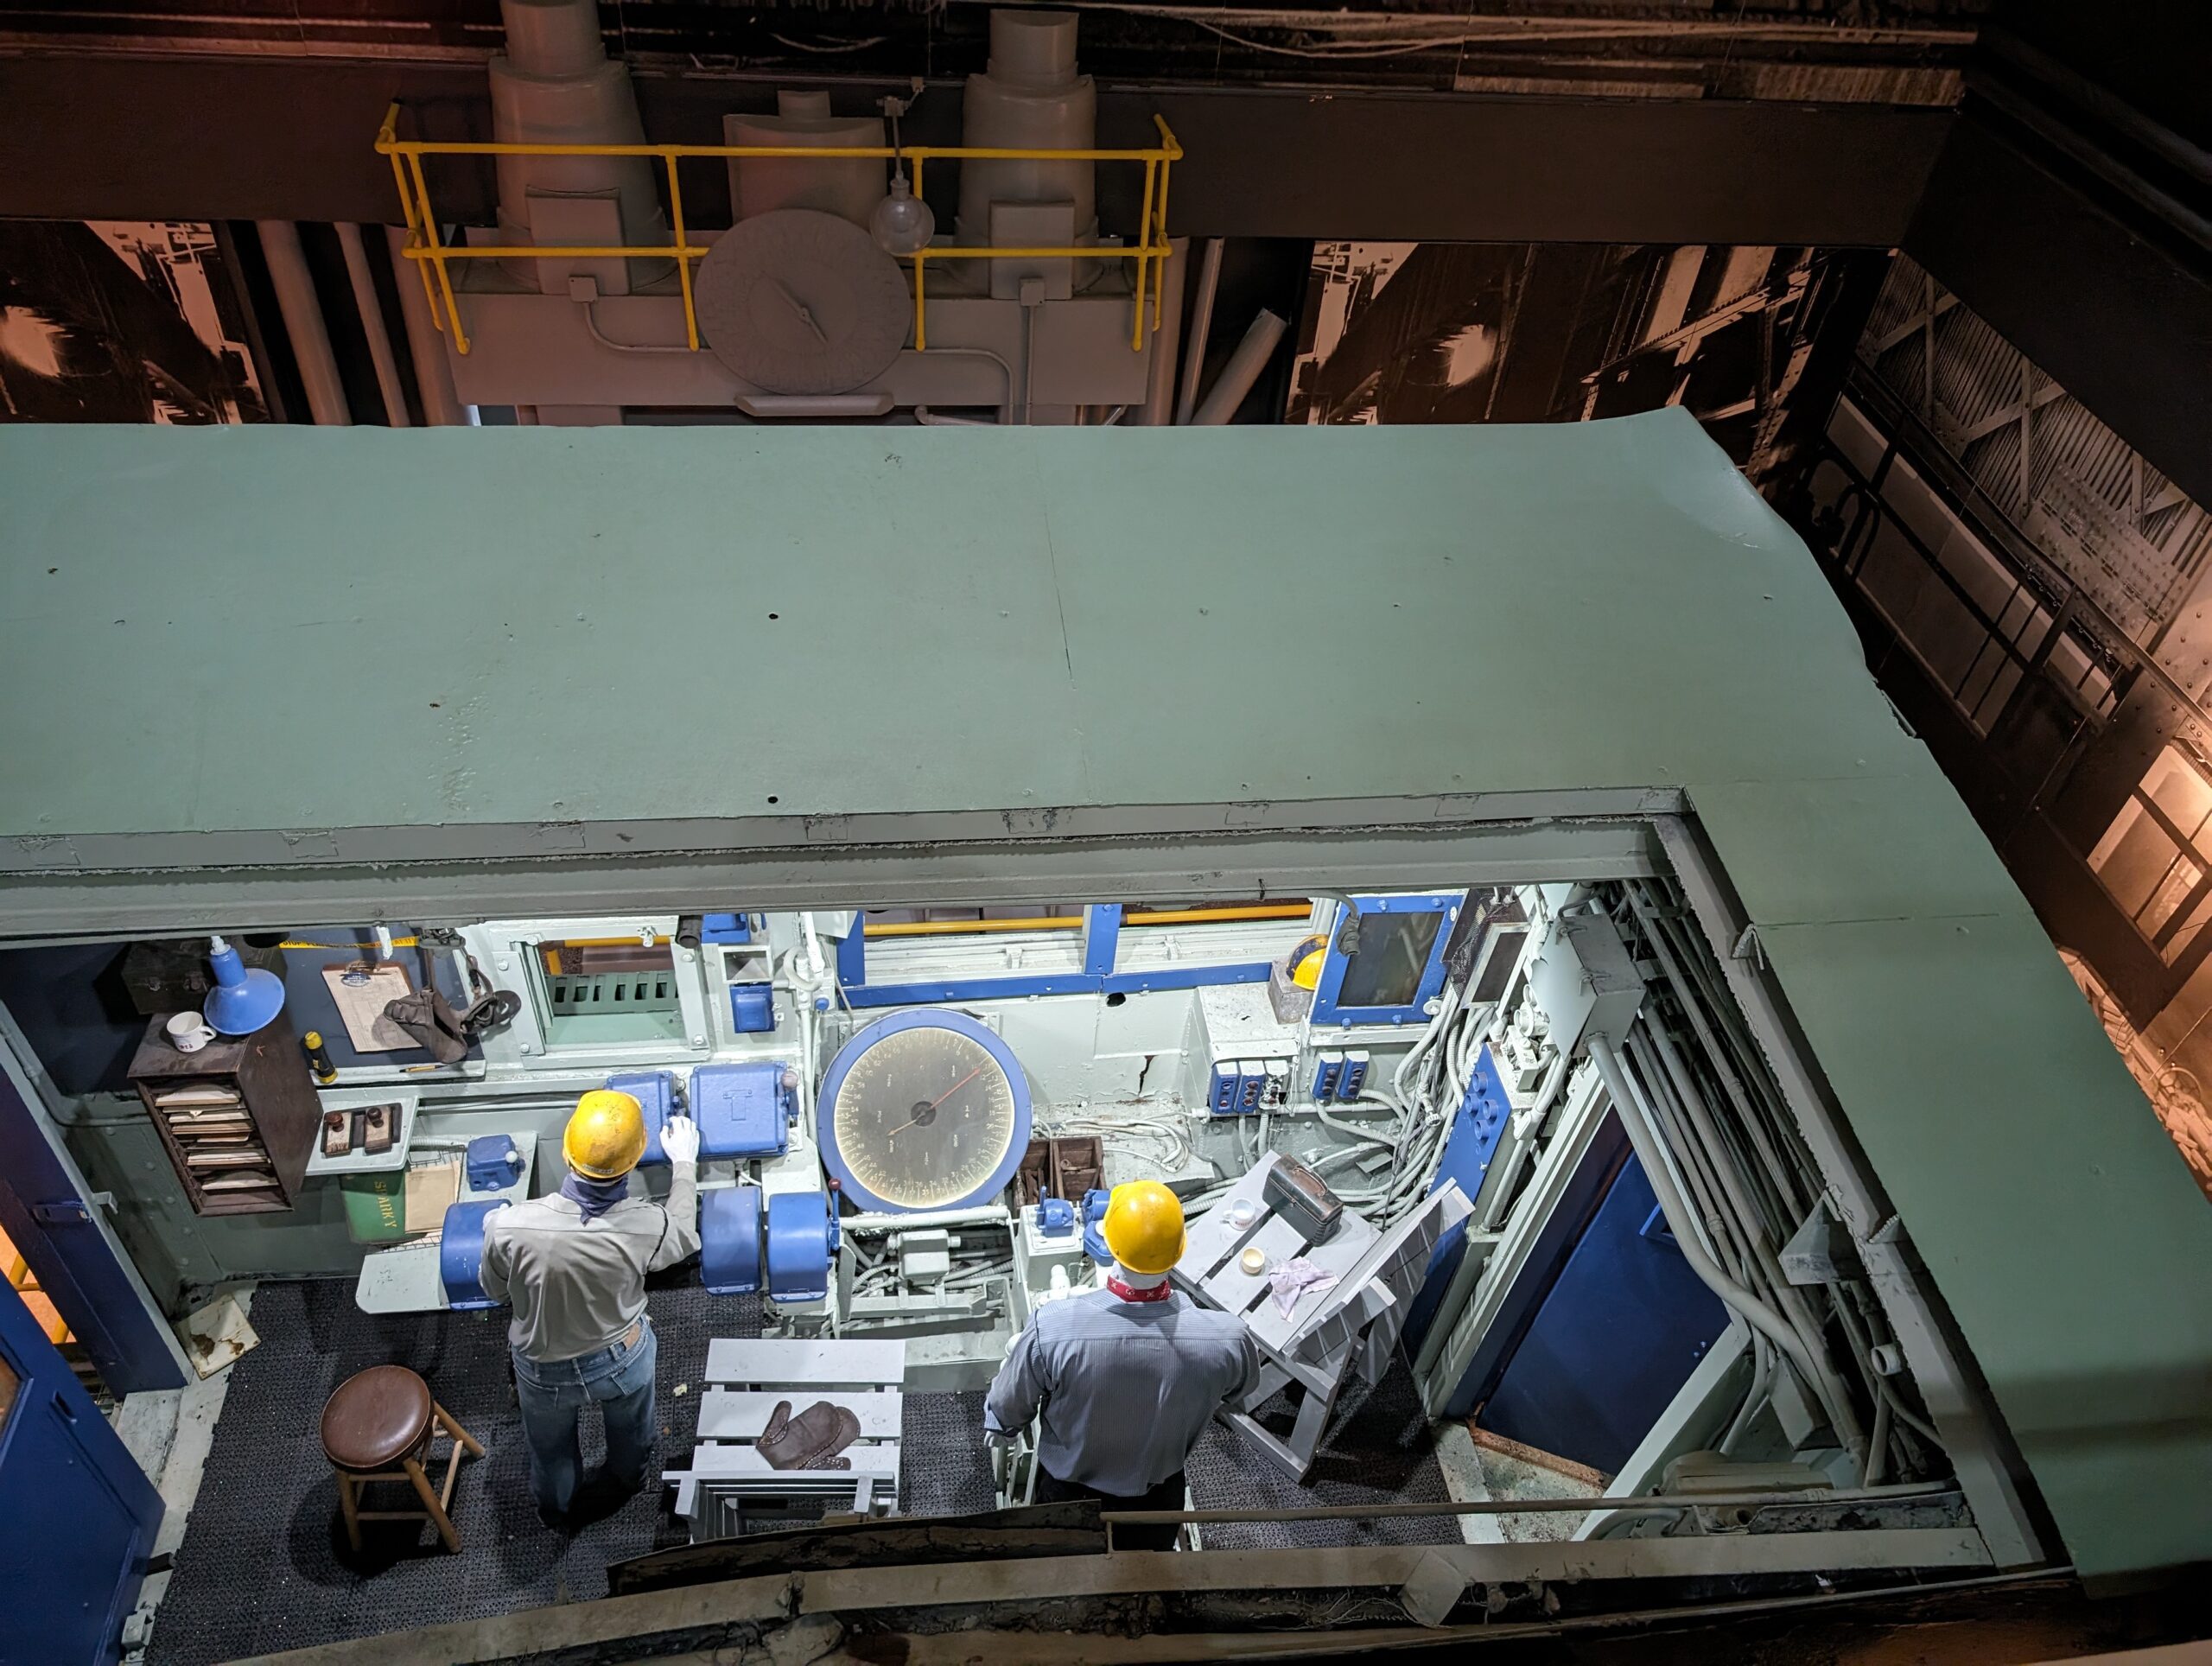 Image looking down into a steel industry control room with two figures working.